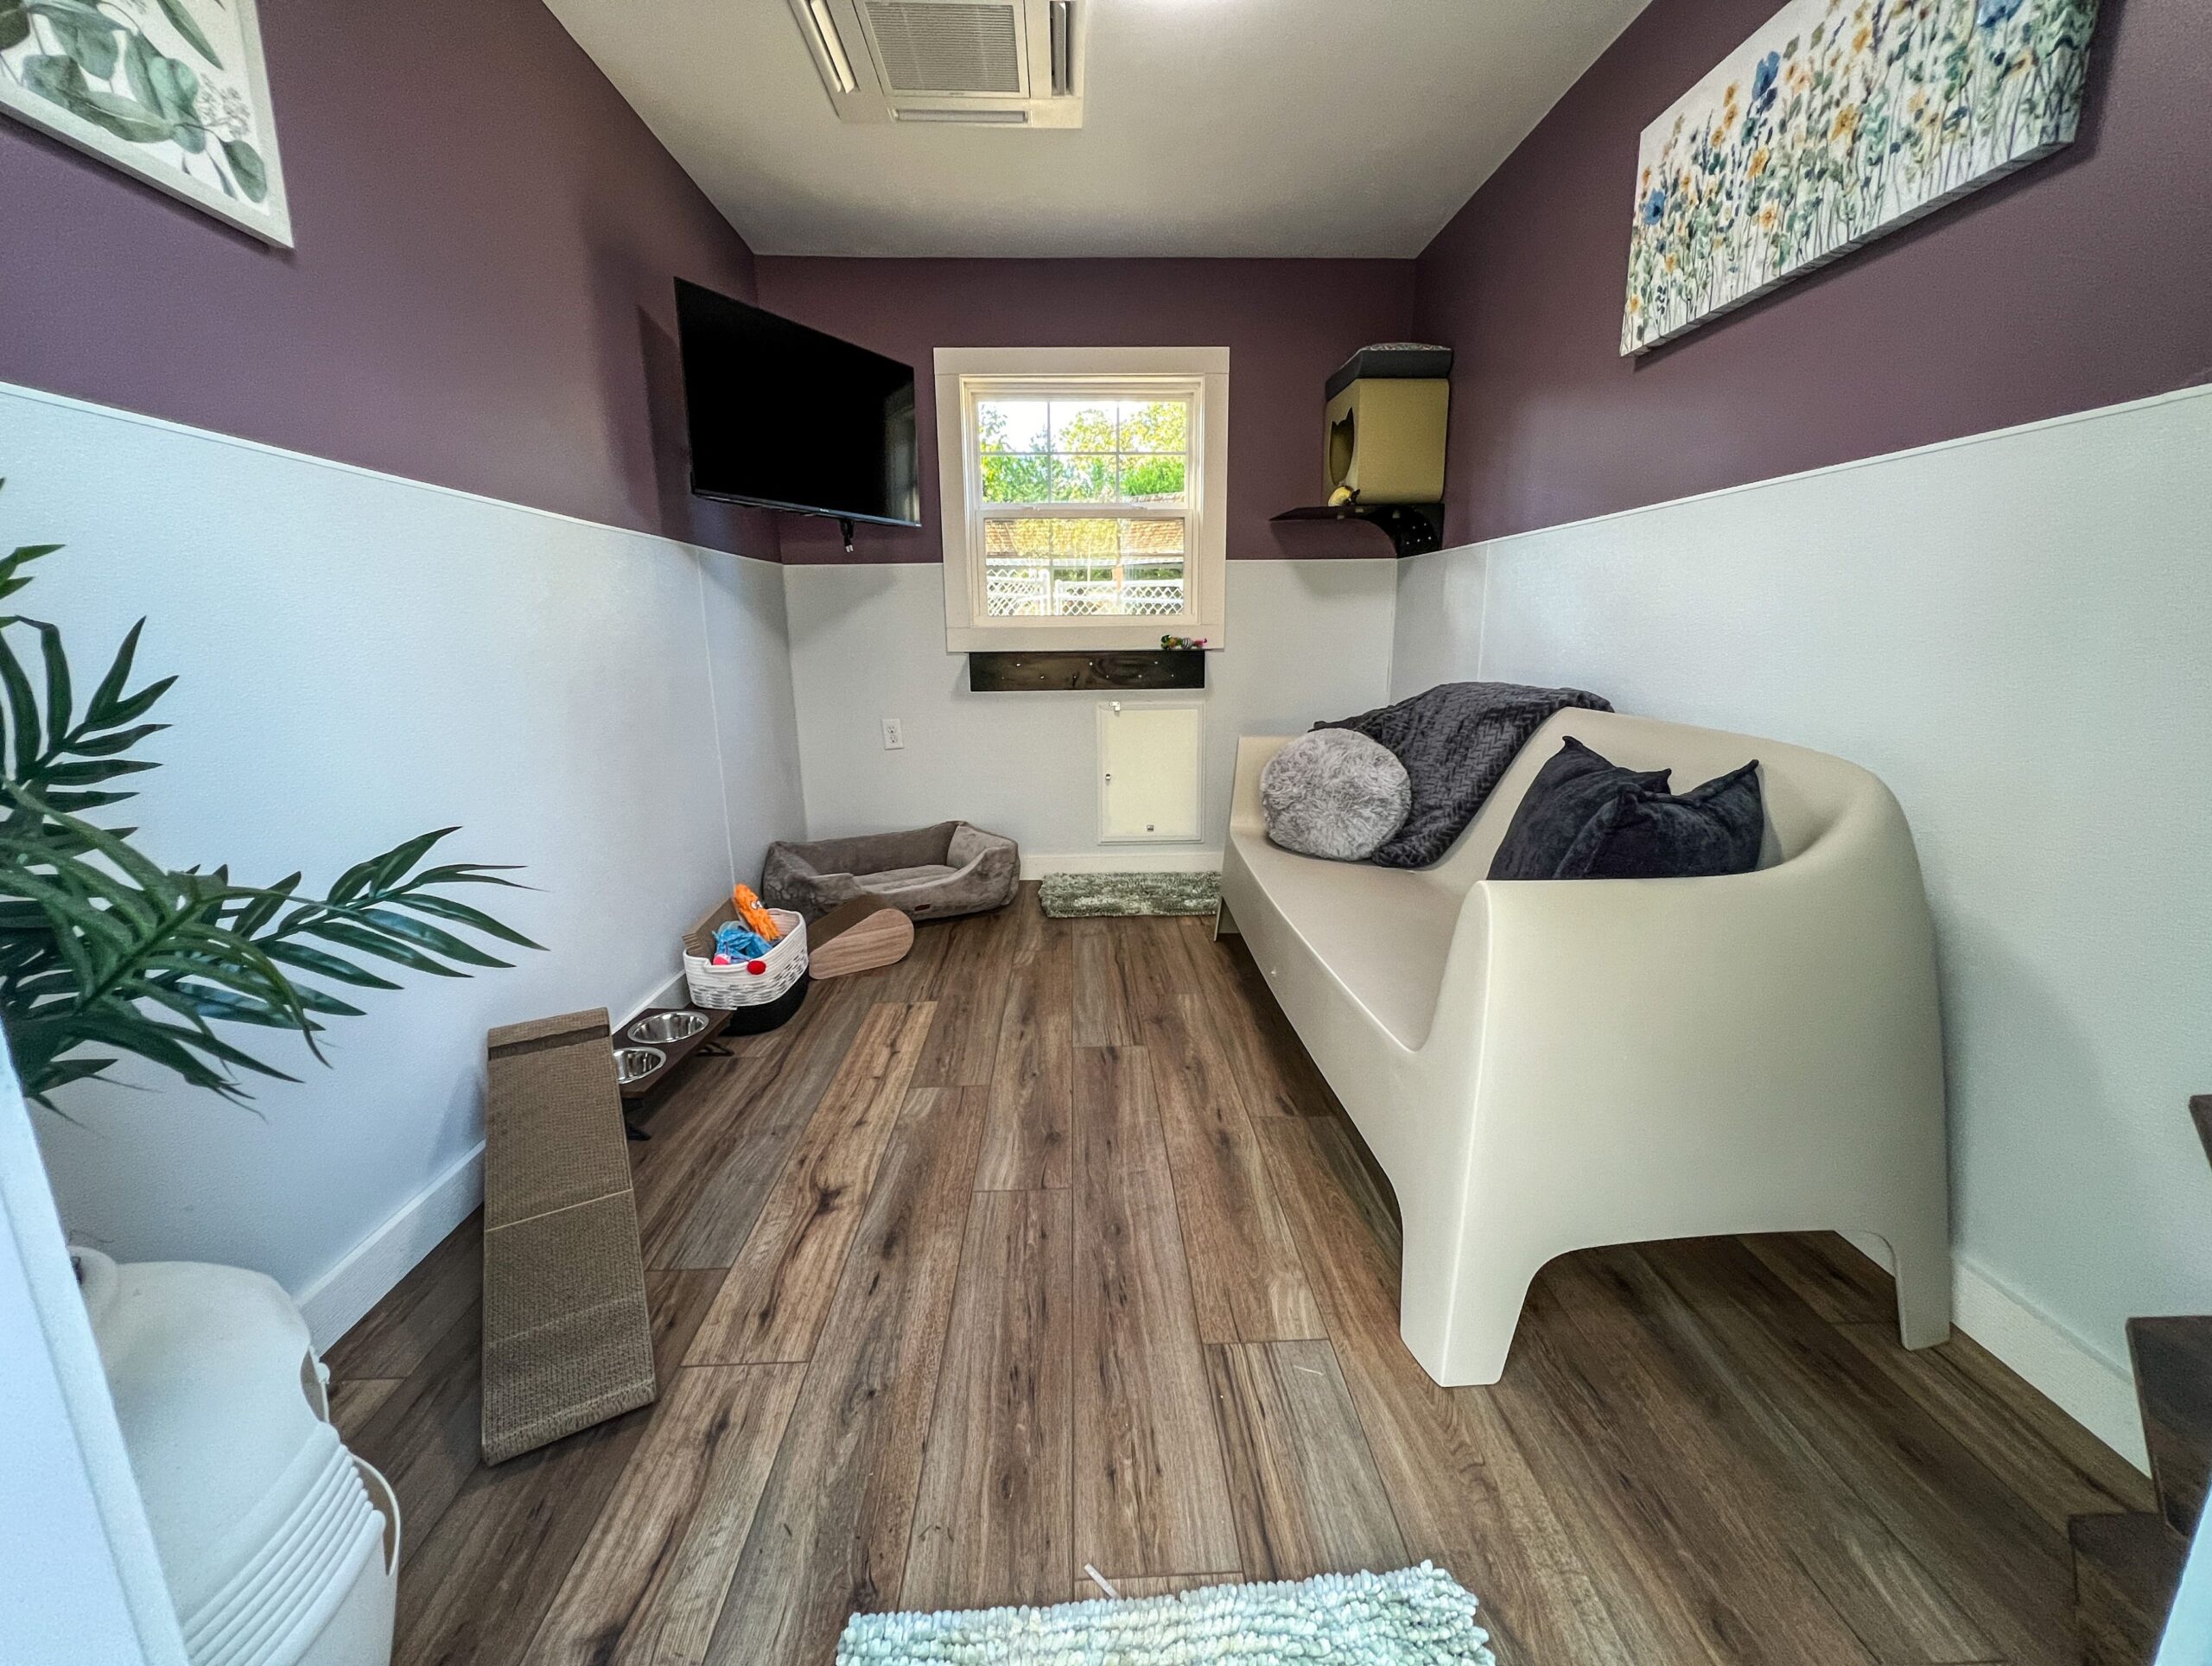 A small pet retreat room is pictured. It includes a couch, dog bed, dog door, and a tv mounted high on the wall.